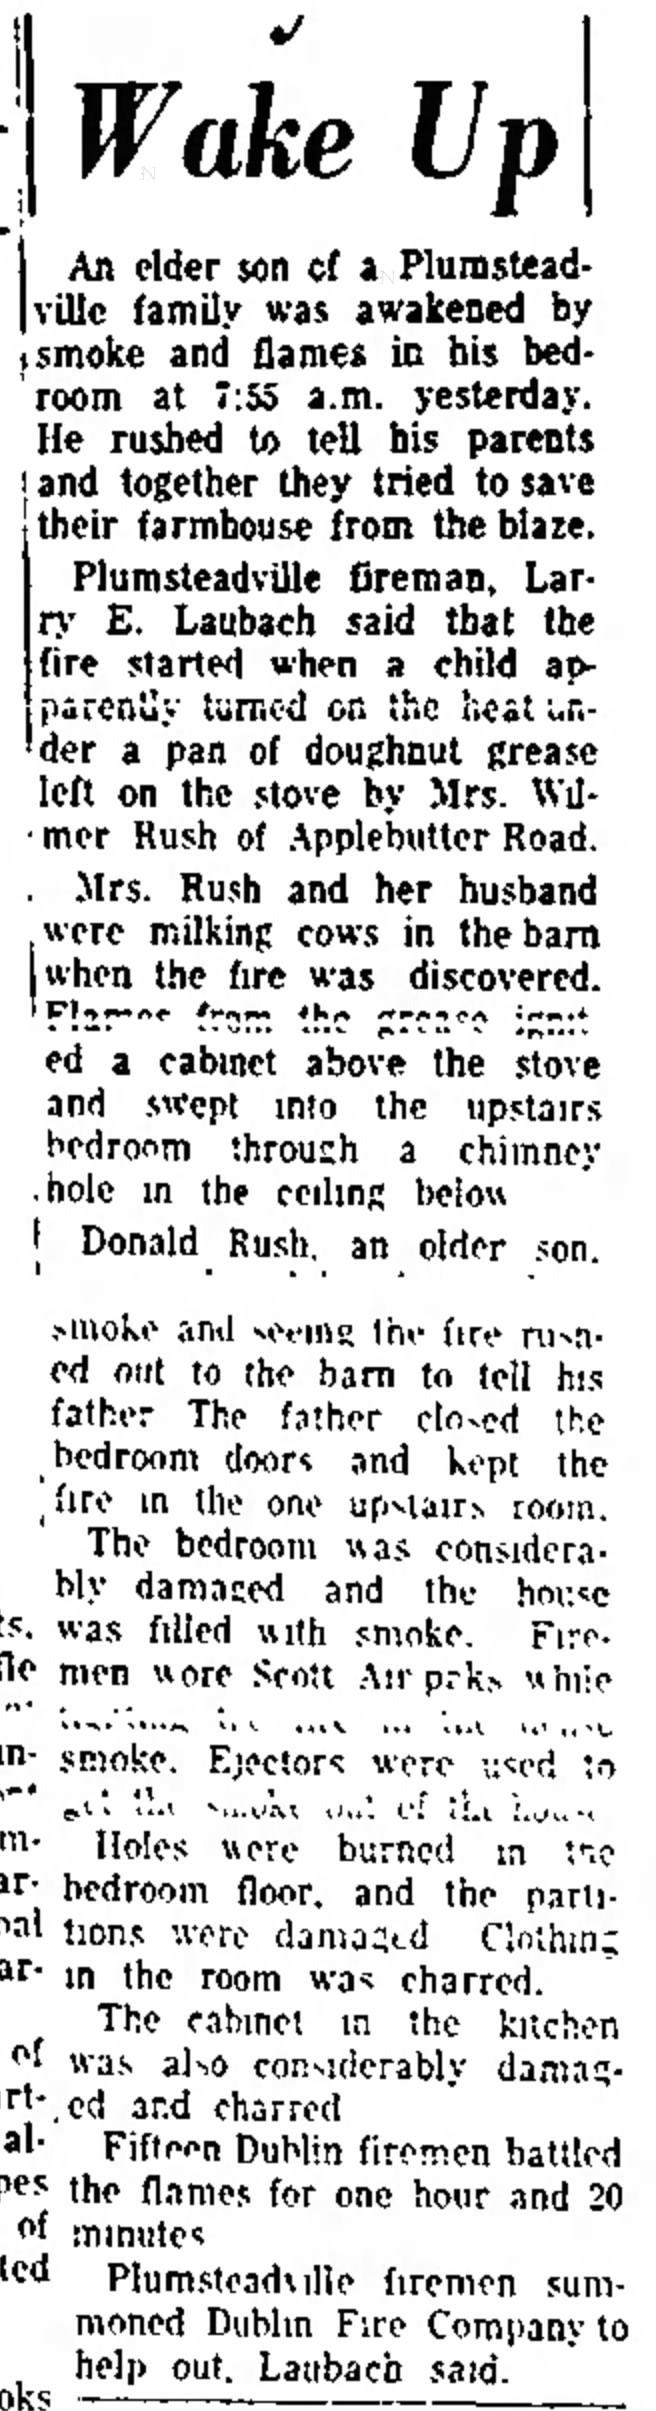 M/M Wilmer Rush - fire at house 
Daily Intell. 21 Feb 1964 pg 1